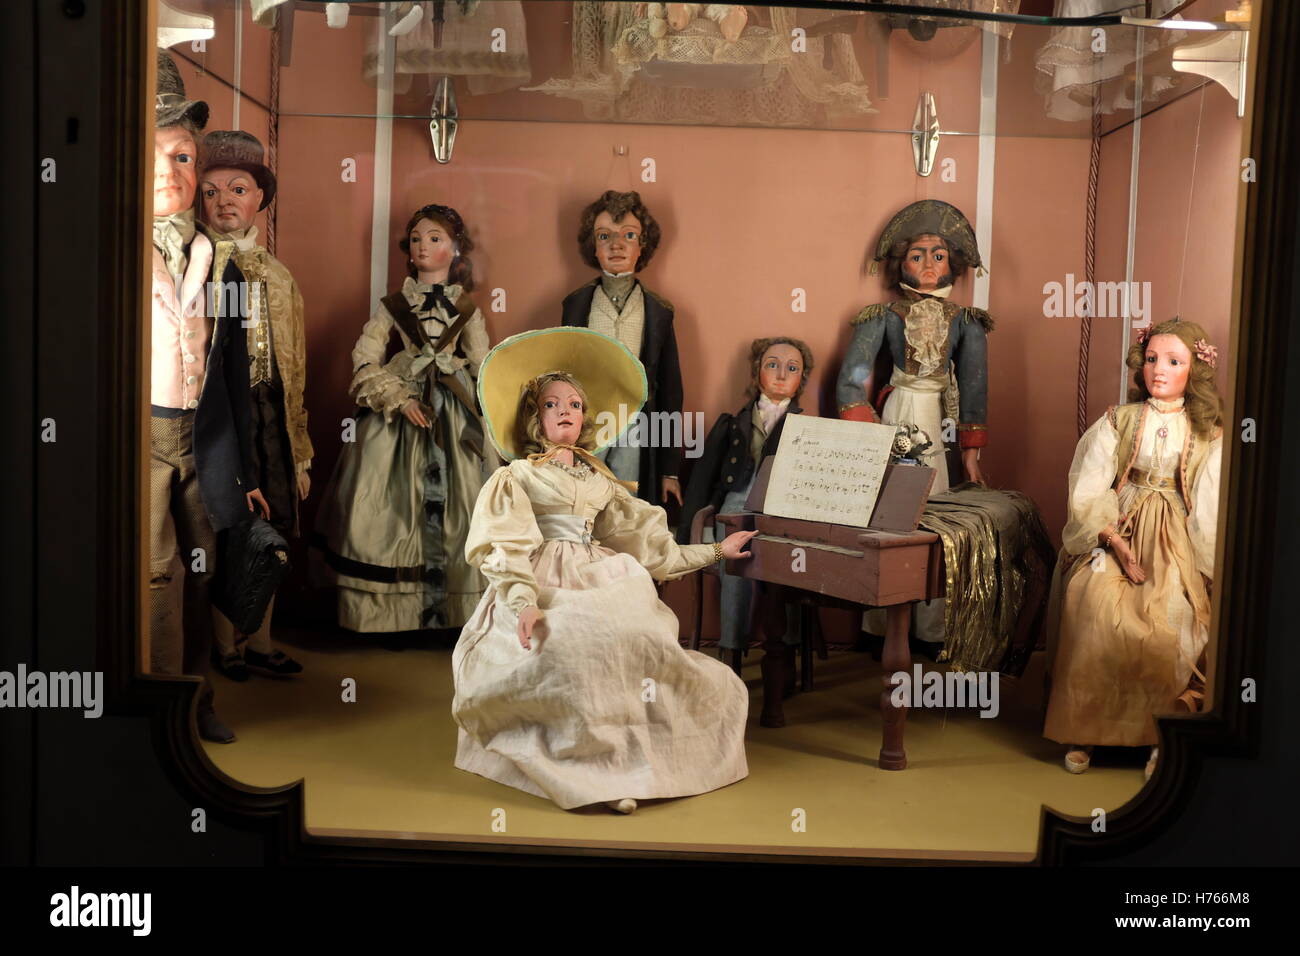 Puppets on display in the Borromeo Palace on Isola Bella, Lake Maggiore Stock Photo